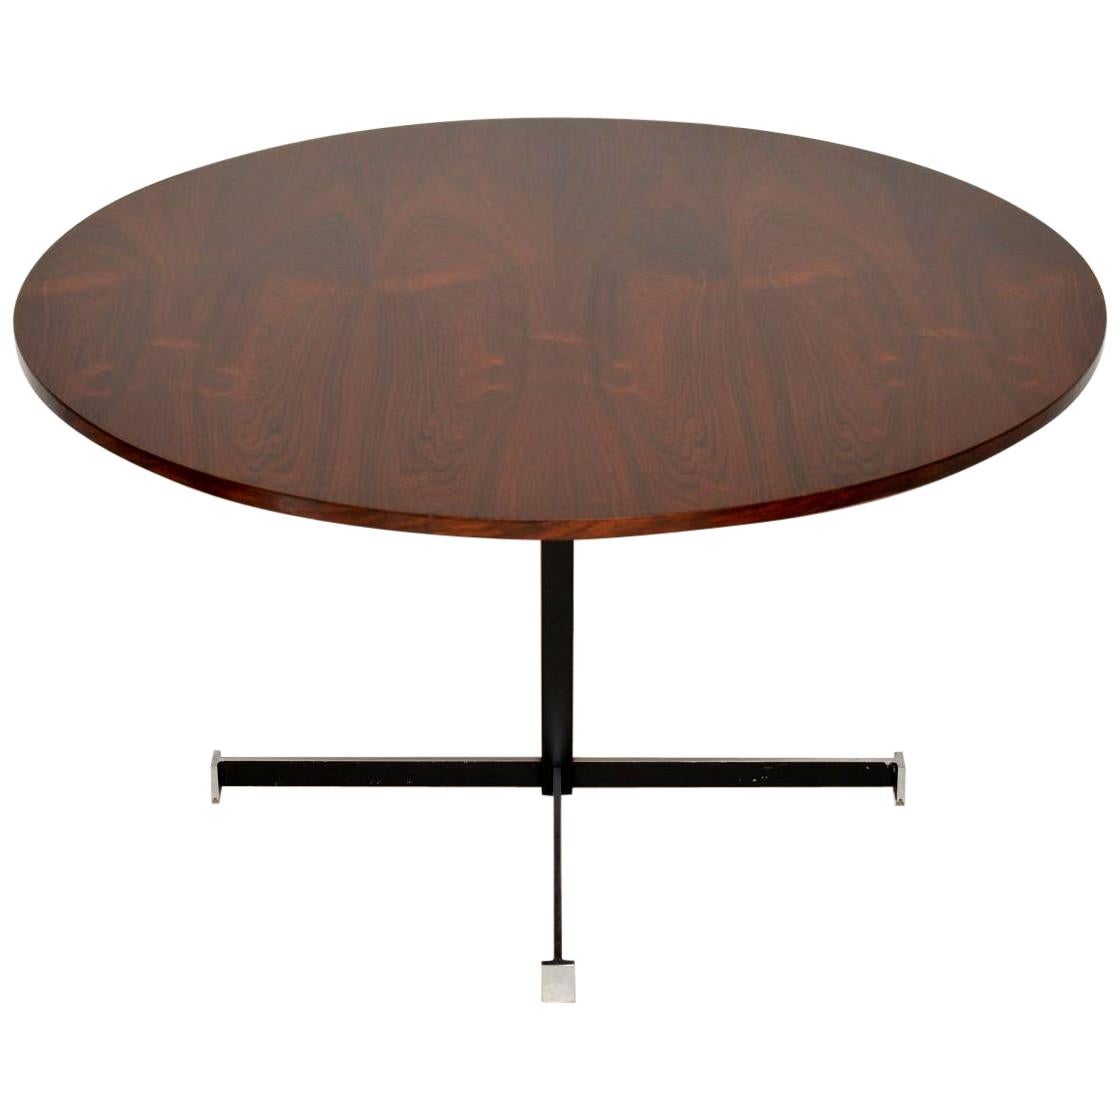 1960s Wood and Chrome Circular Dining Table